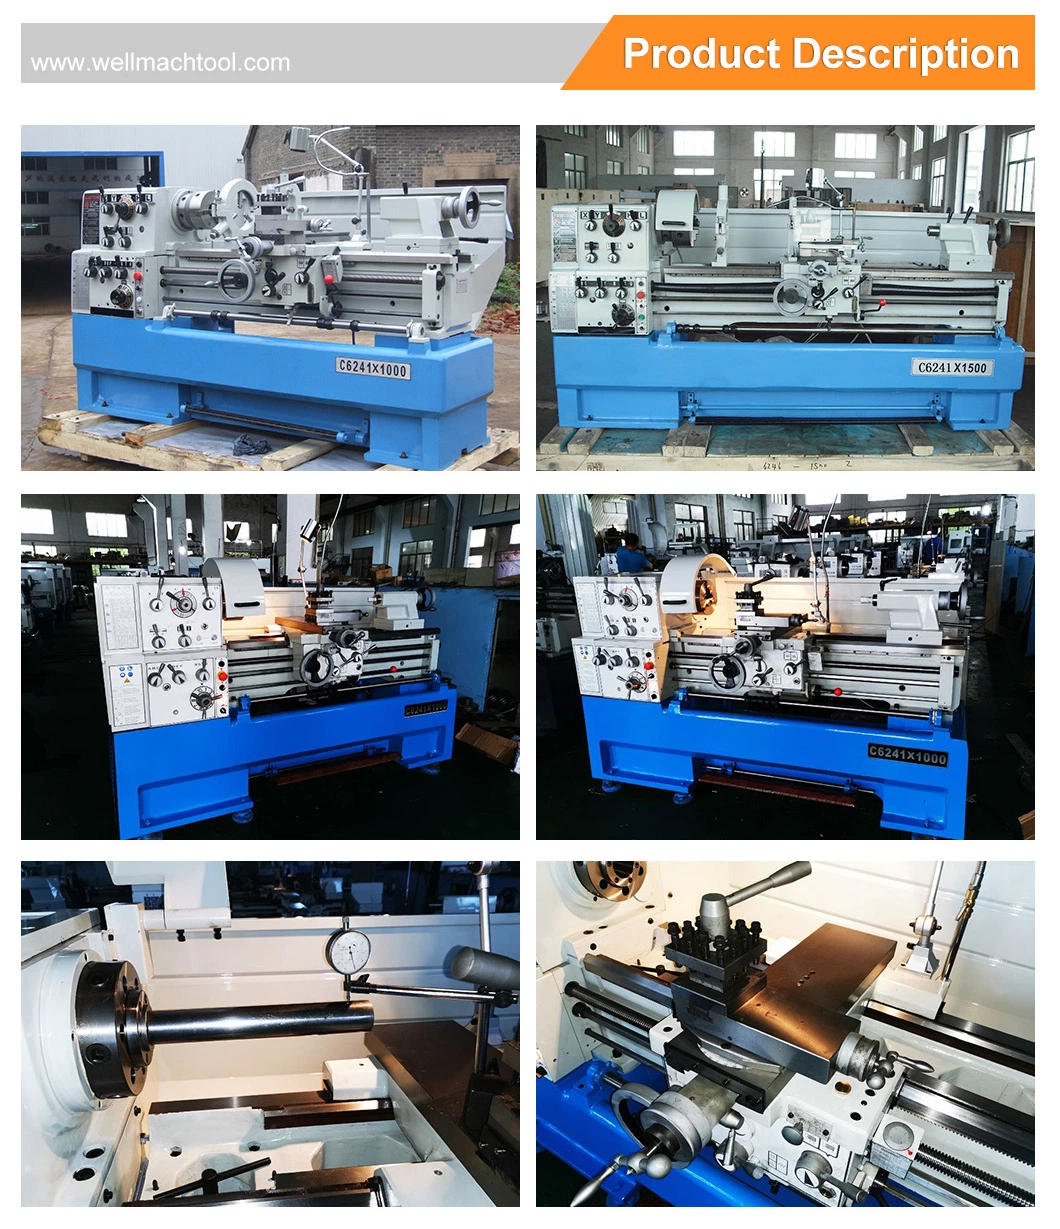 C6241 410mm swing over bed lathe machine for metal cutting